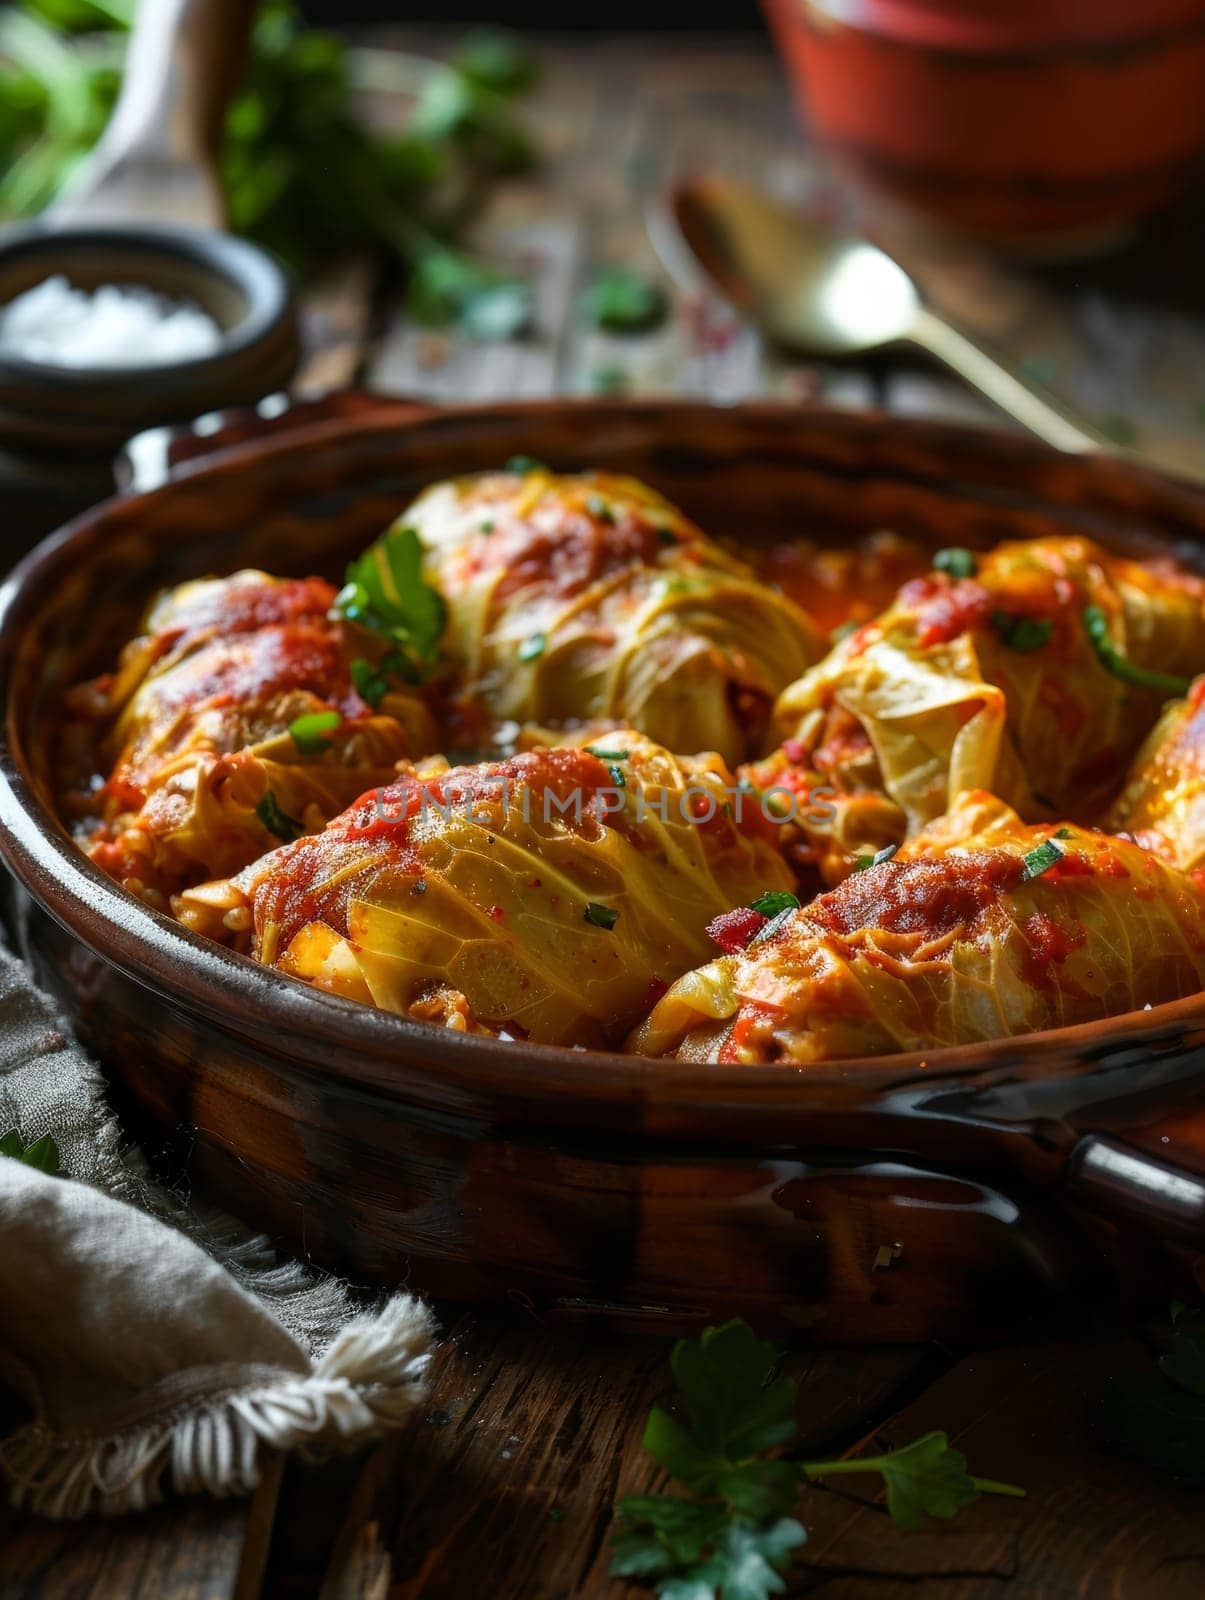 Traditional Romanian sarmale, or cabbage rolls stuffed with minced meat and rice, served in a rustic clay dish. This savory ethnic dish showcases the rich culinary heritage Romanian cuisine. by sfinks